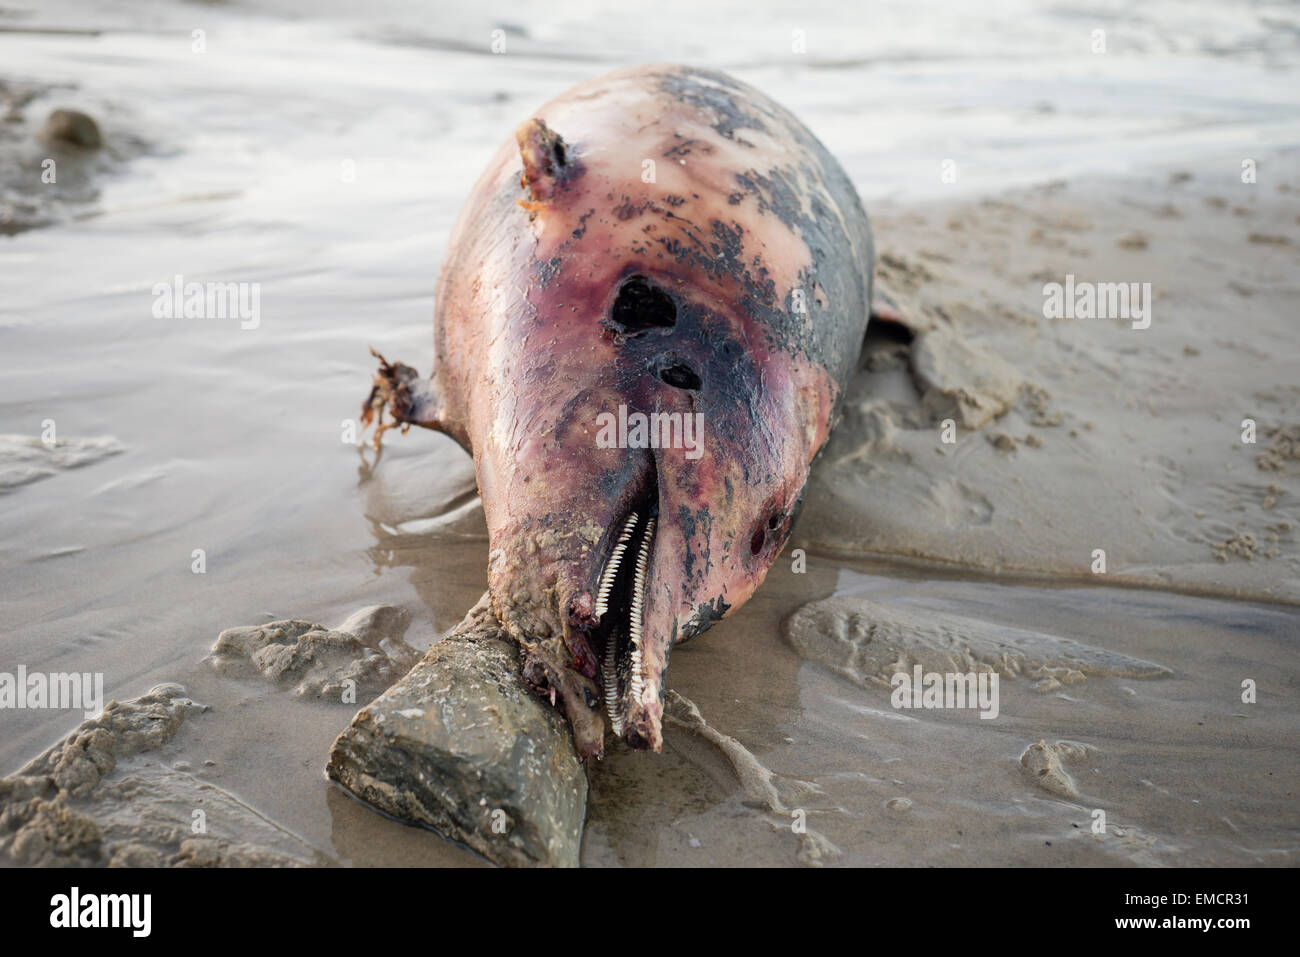 Spain, Galicia, Ferrol, Dead dolphin in state of putrefaction on the beach Stock Photo